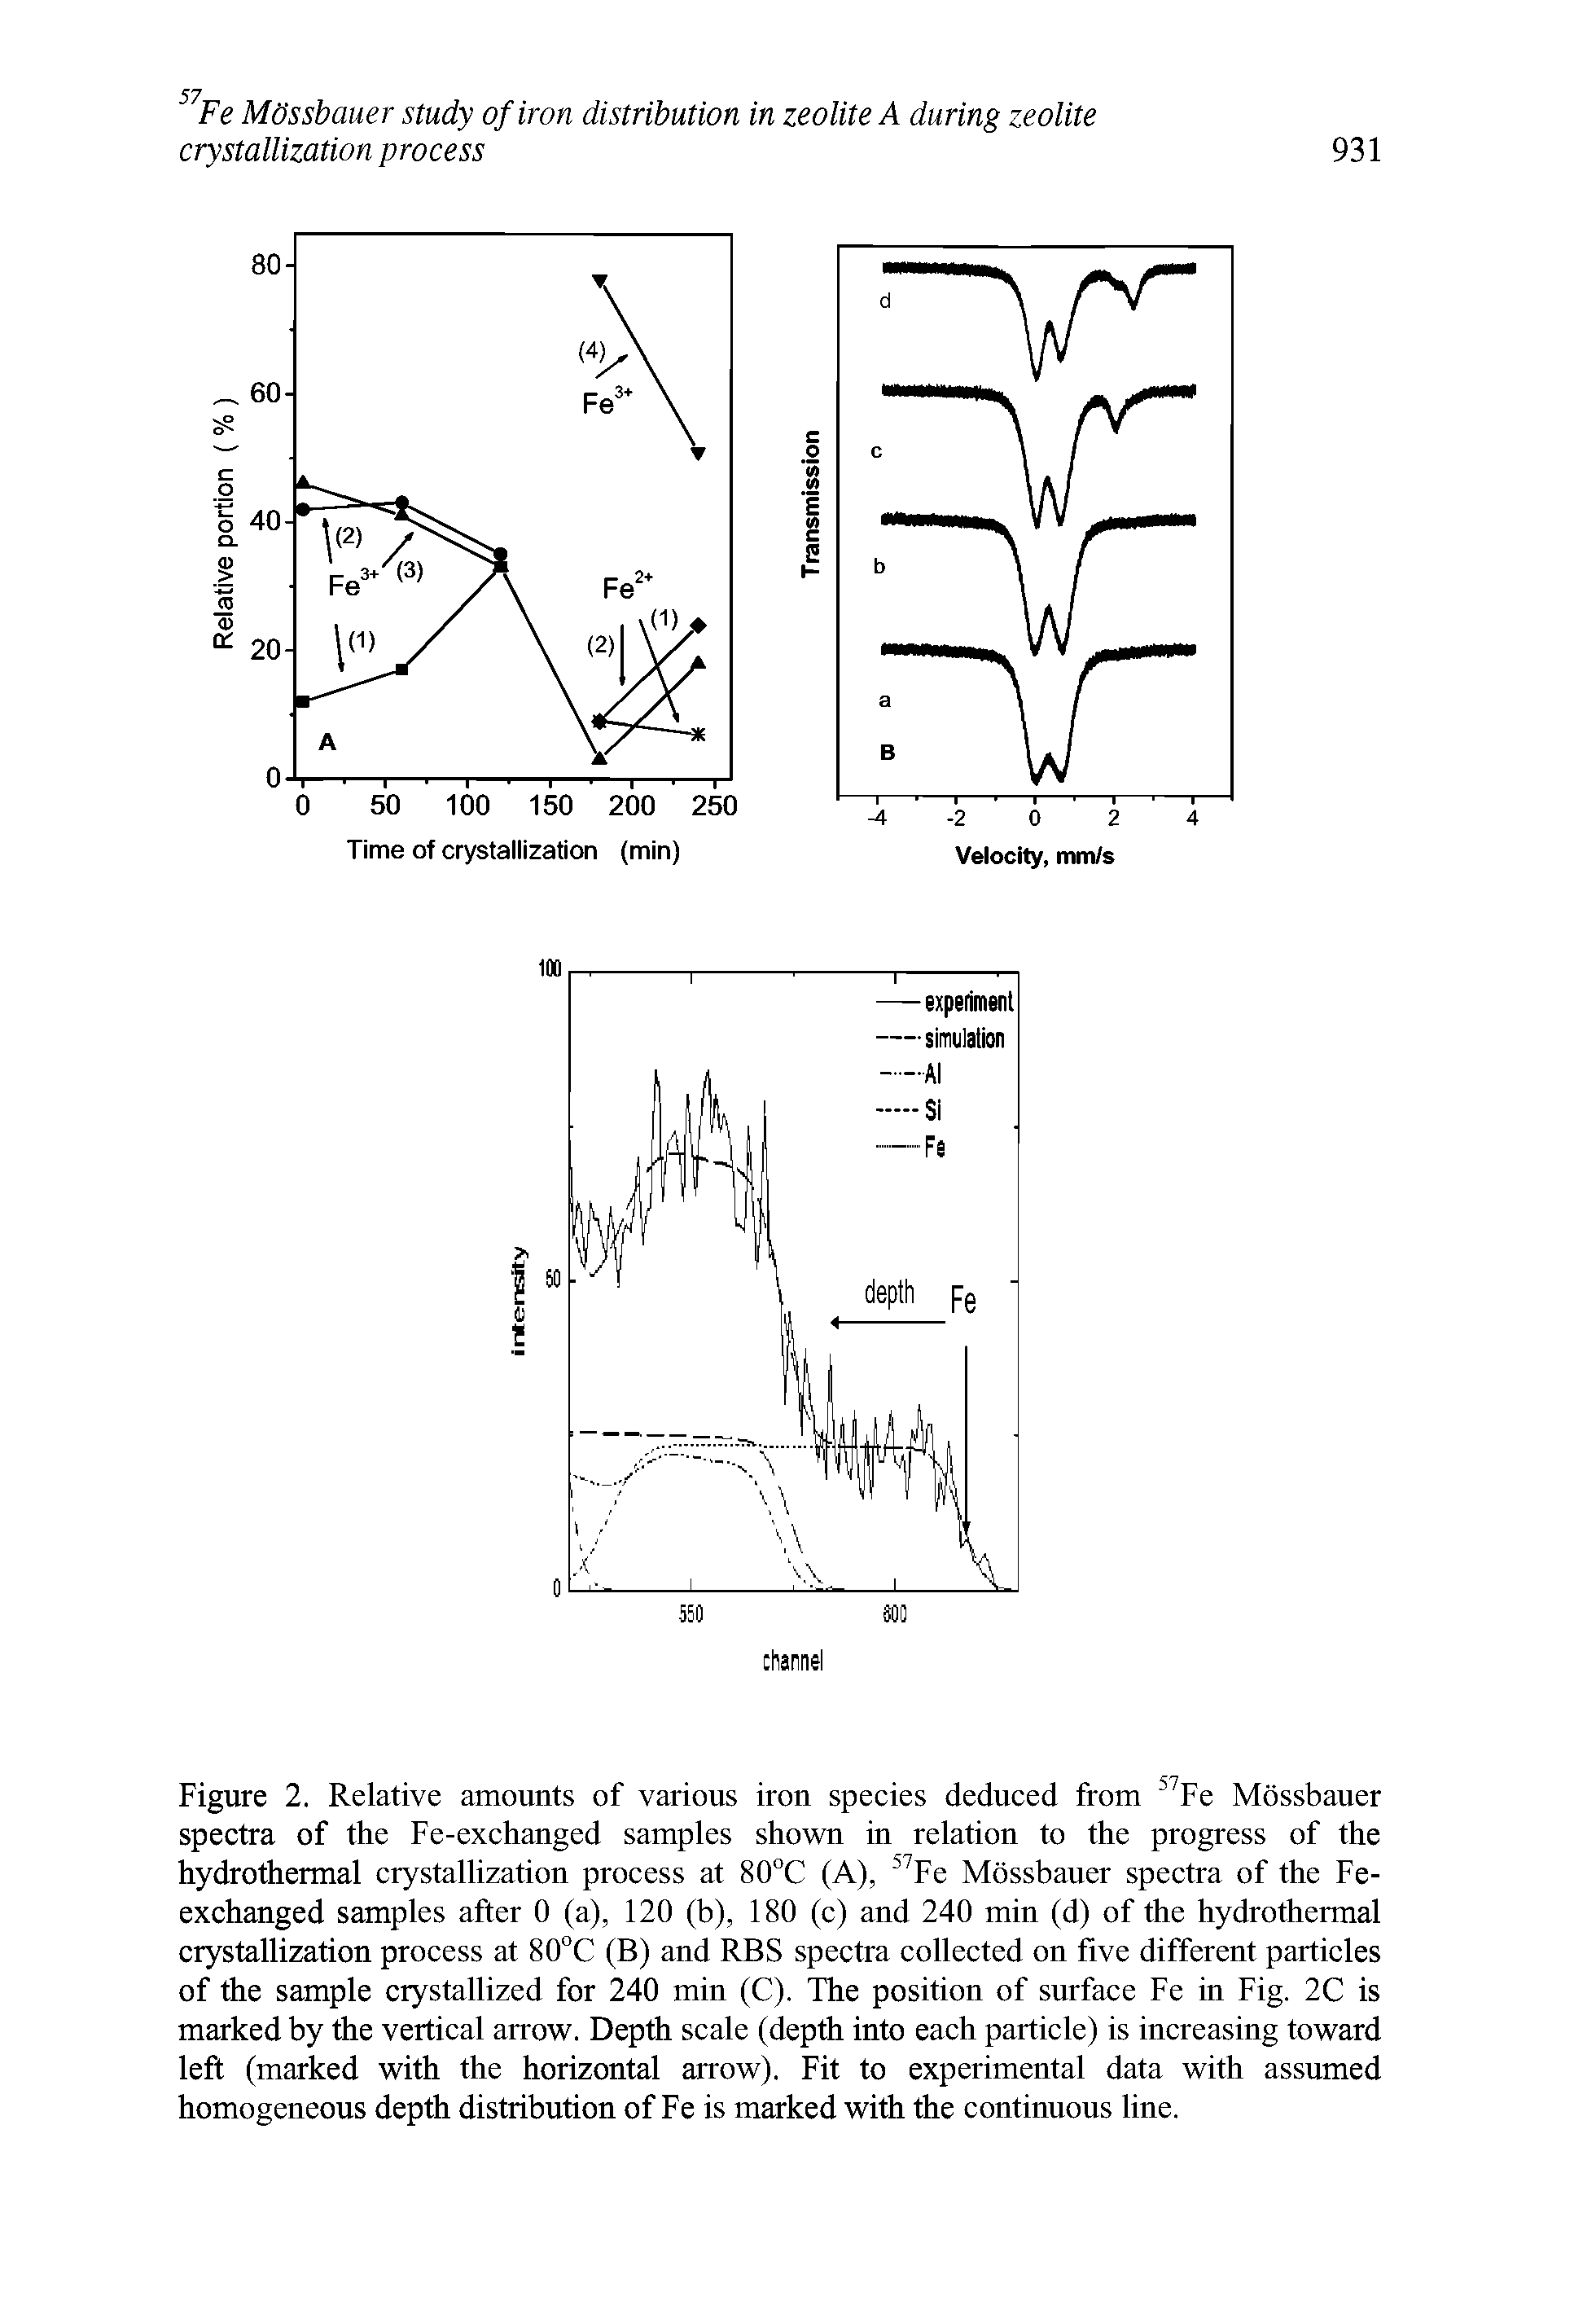 Figure 2. Relative amounts of various iron species deduced from 57Fe Mossbauer spectra of the Fe-exchanged samples shown in relation to the progress of the hydrothermal crystallization process at 80°C (A), 57Fe Mossbauer spectra of the Fe-exchanged samples after 0 (a), 120 (b), 180 (c) and 240 min (d) of the hydrothermal crystallization process at 80°C (B) and RBS spectra collected on five different particles of the sample crystallized for 240 min (C). The position of surface Fe in Fig. 2C is marked by the vertical arrow. Depth scale (depth into each particle) is increasing toward left (marked with the horizontal arrow). Fit to experimental data with assumed homogeneous depth distribution of Fe is marked with the continuous line.